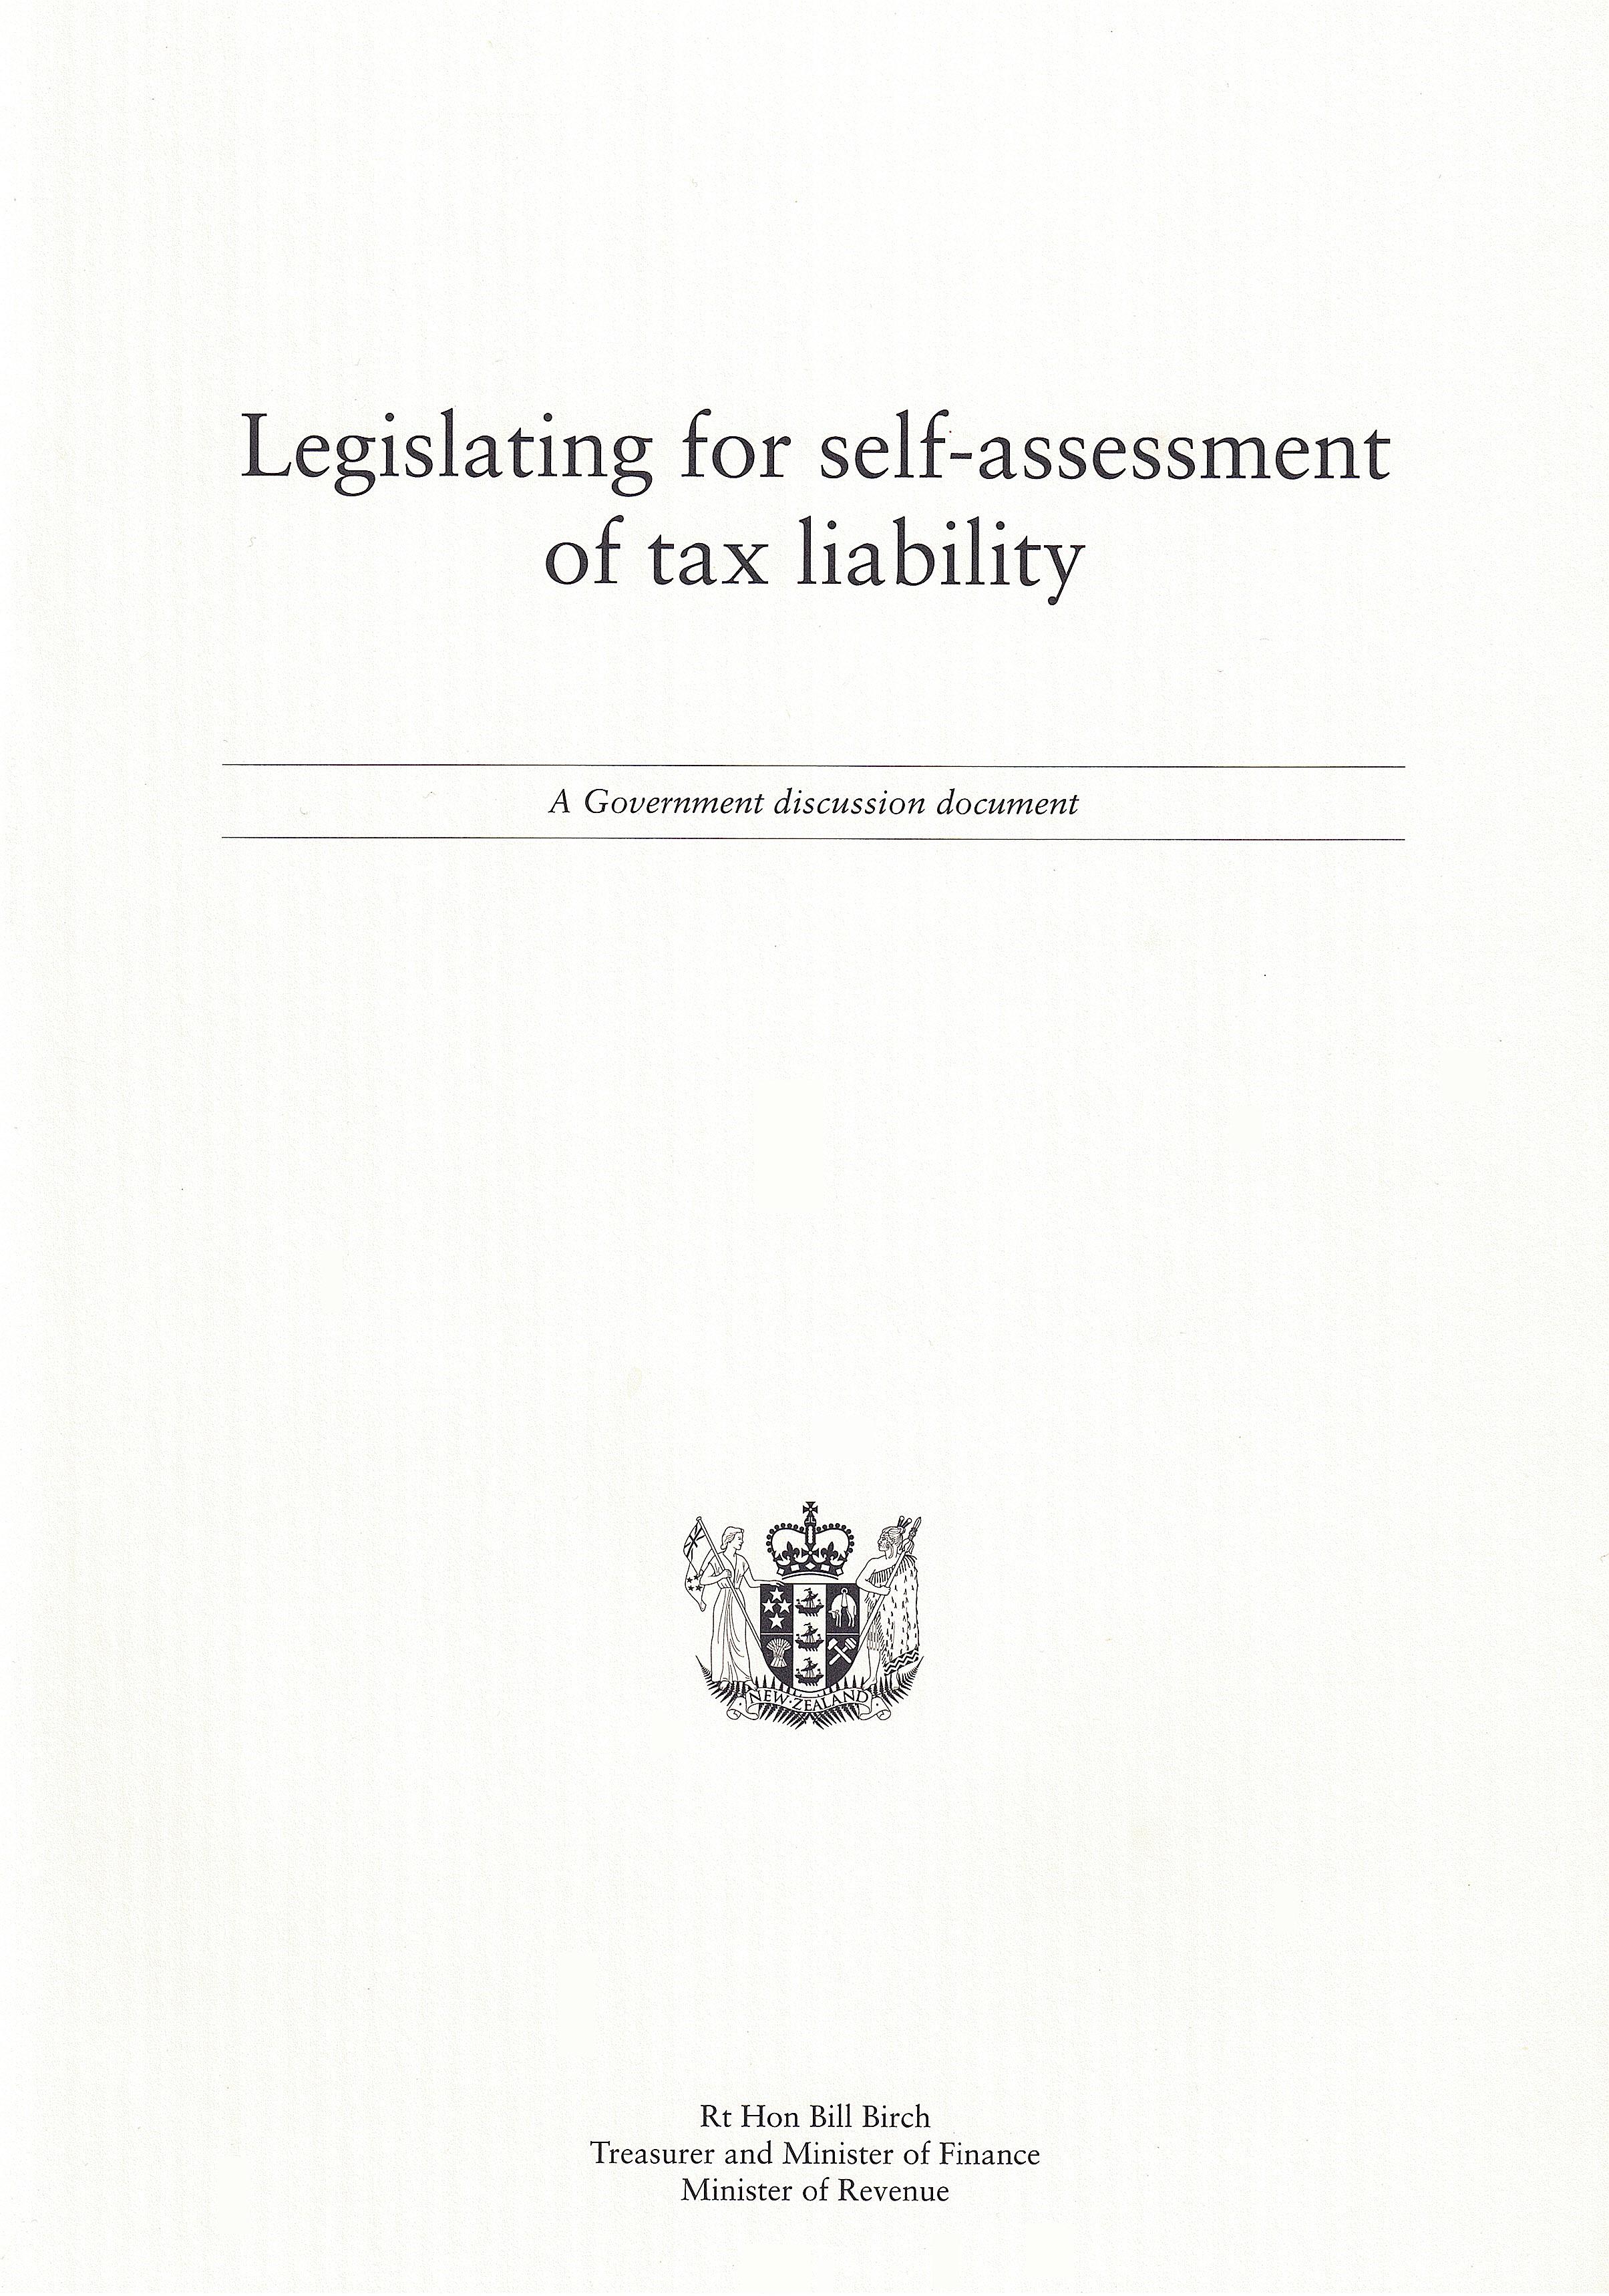 Publication cover image. Title = Legislating for self-assessment of tax liability - a Government discussion document. August 1998.